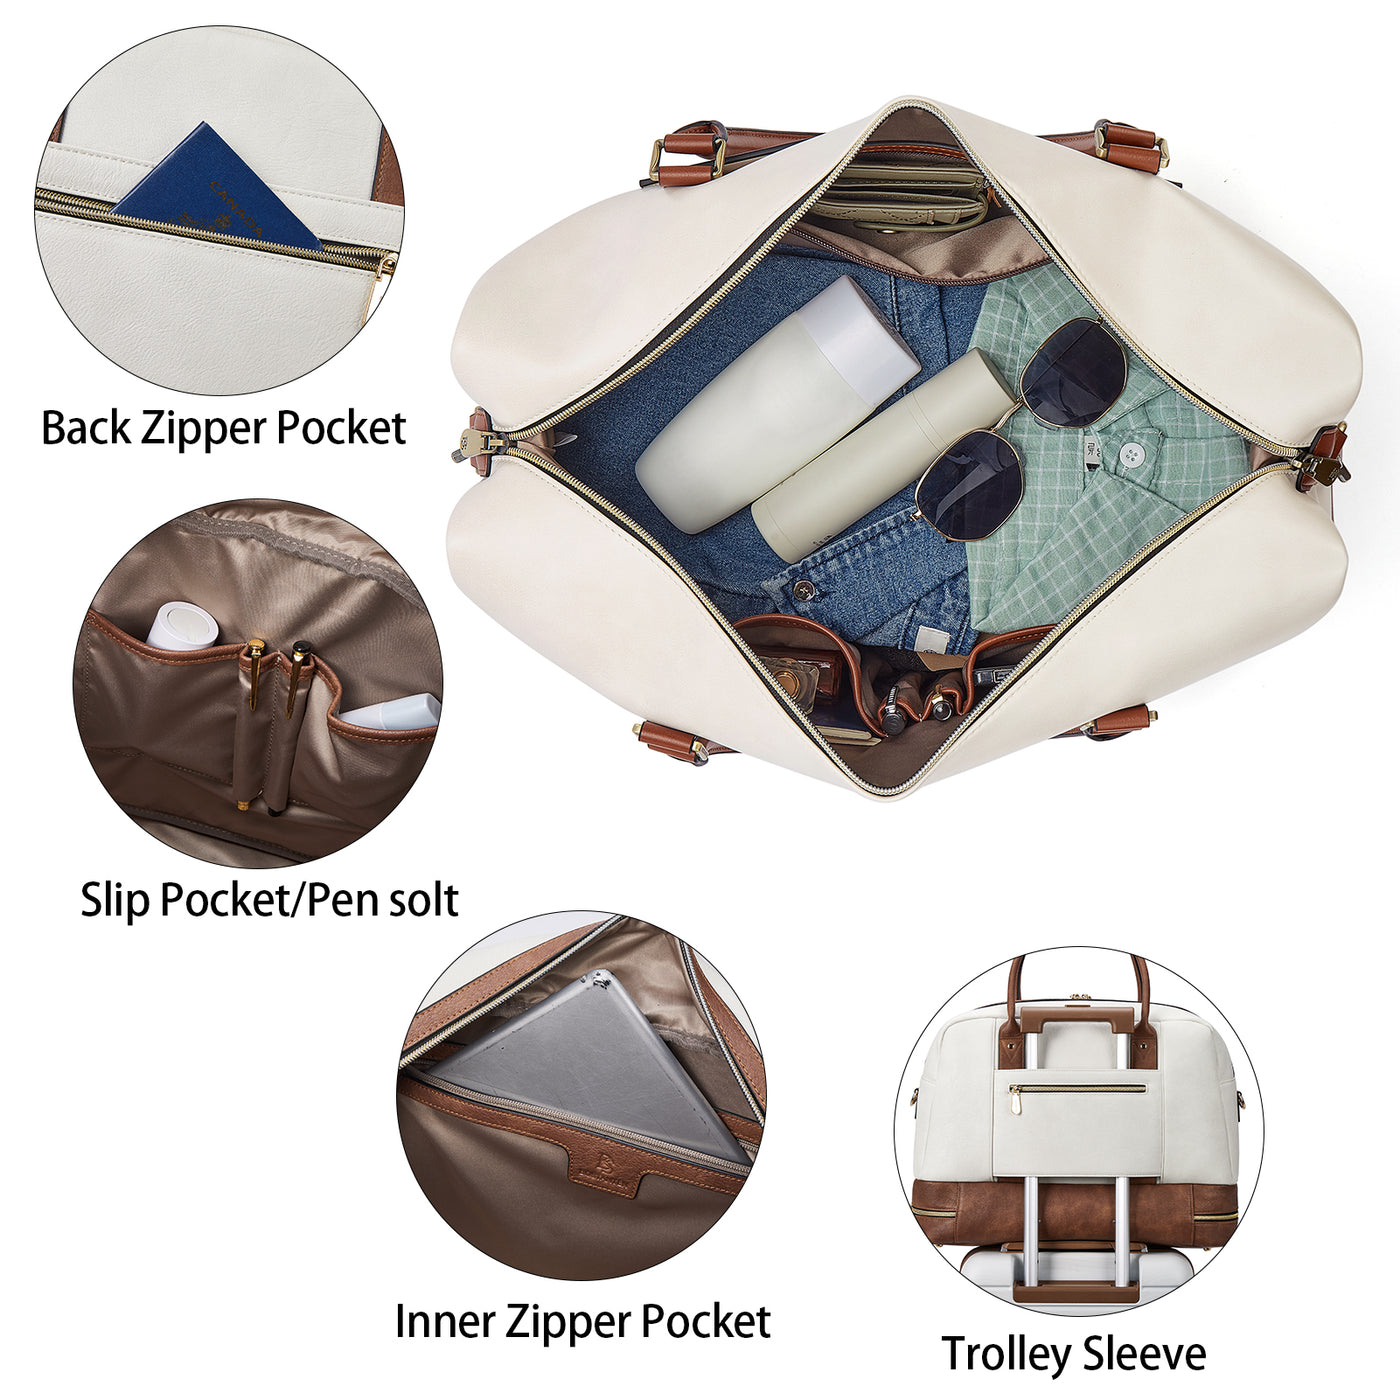 Zenobe Chic and Practical: Women's Leather Travel Duffle Bag for Every Trip